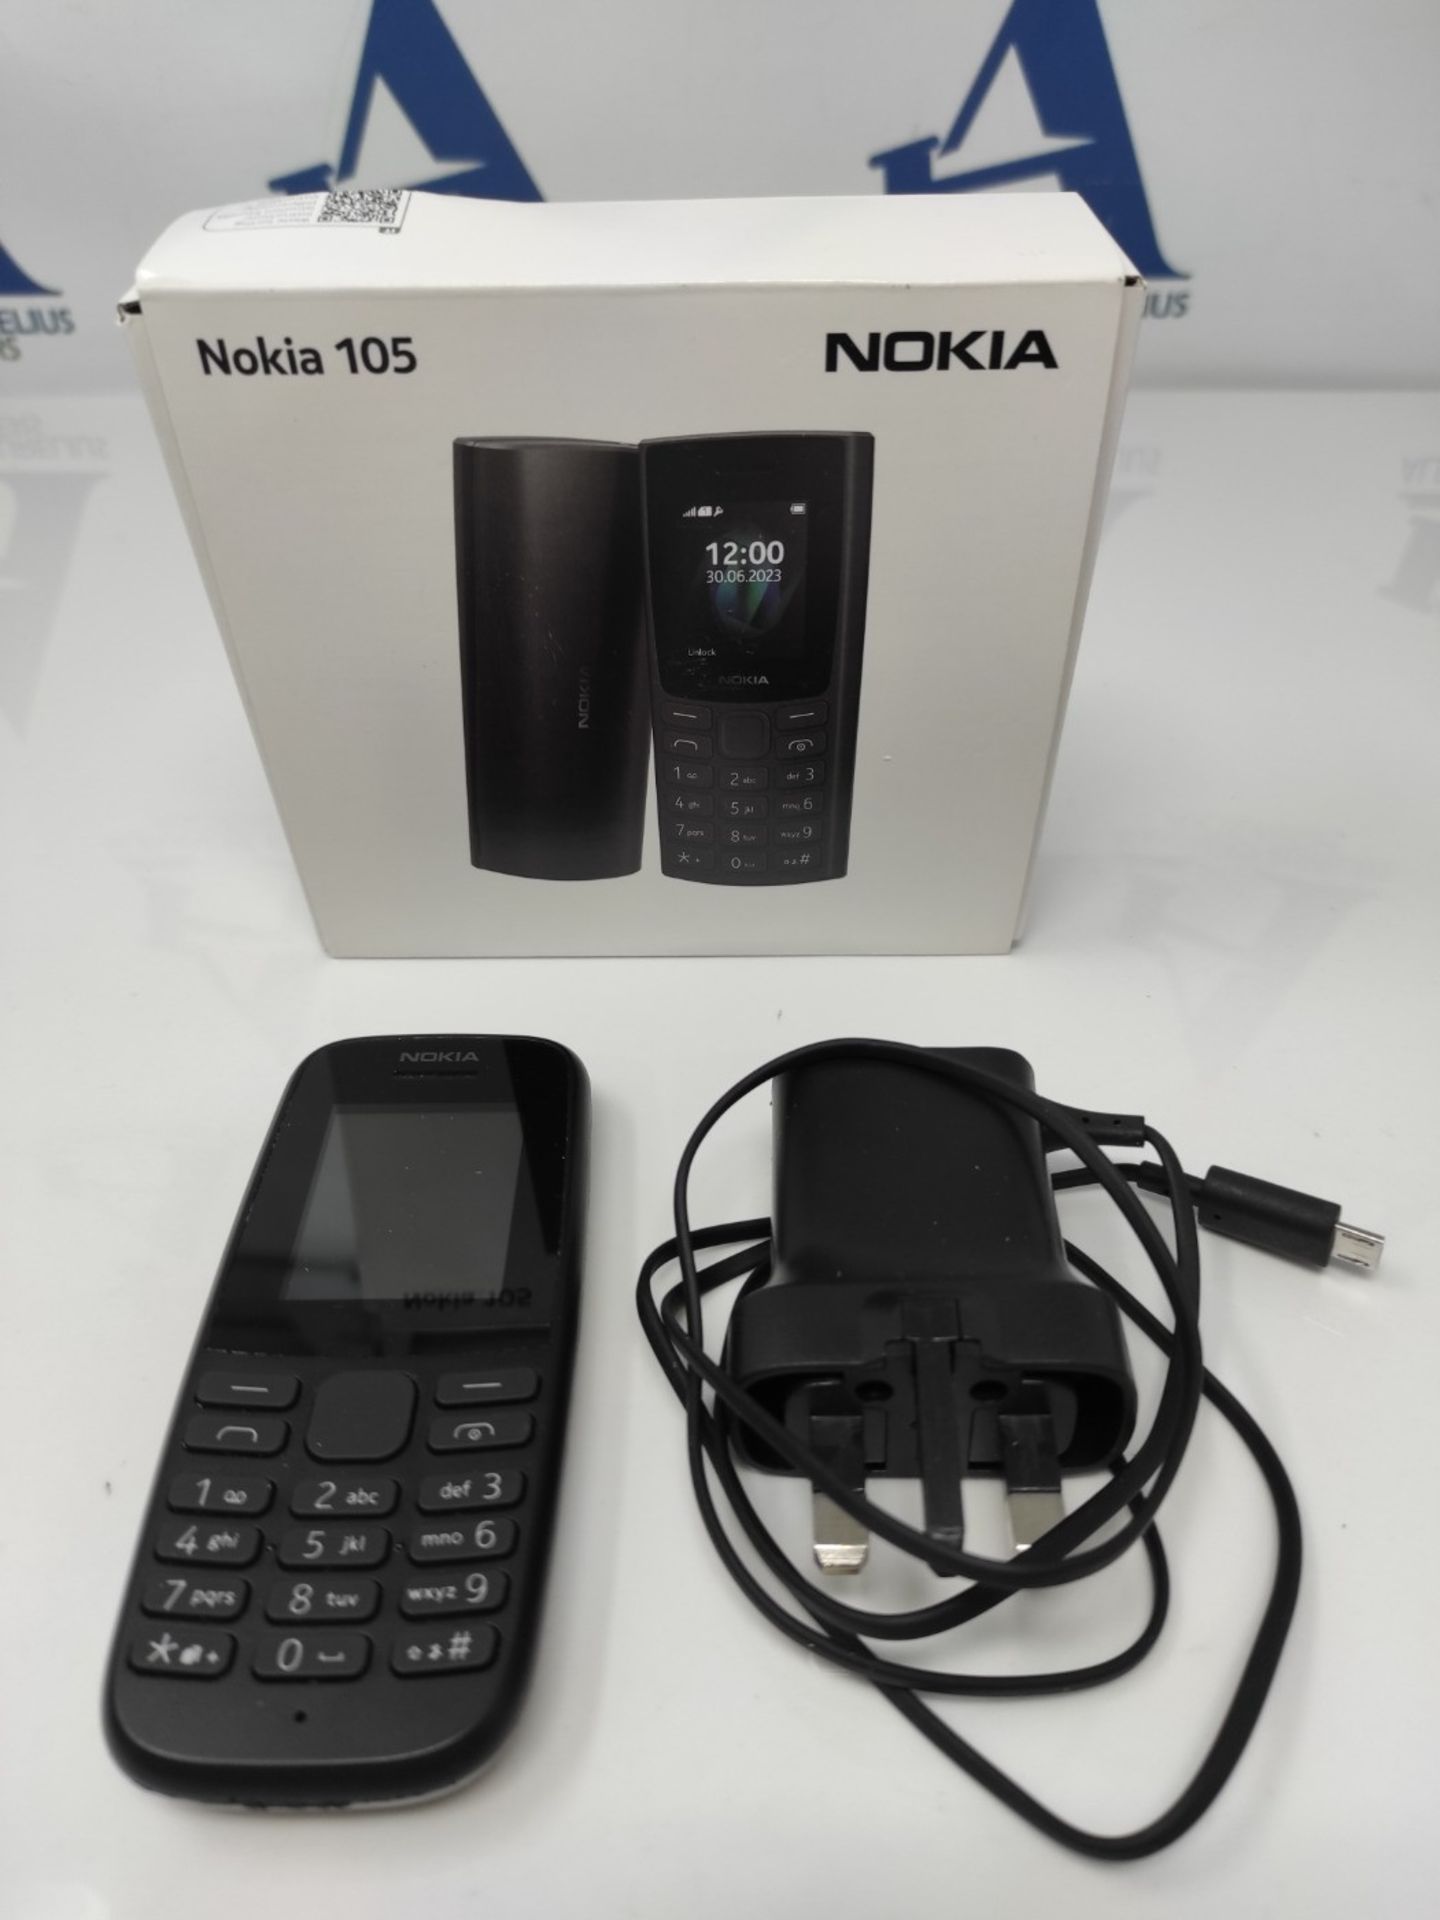 Nokia 105 2G Feature Phone with long-lasting battery, 12 hours of talk-time, wireless - Image 2 of 2